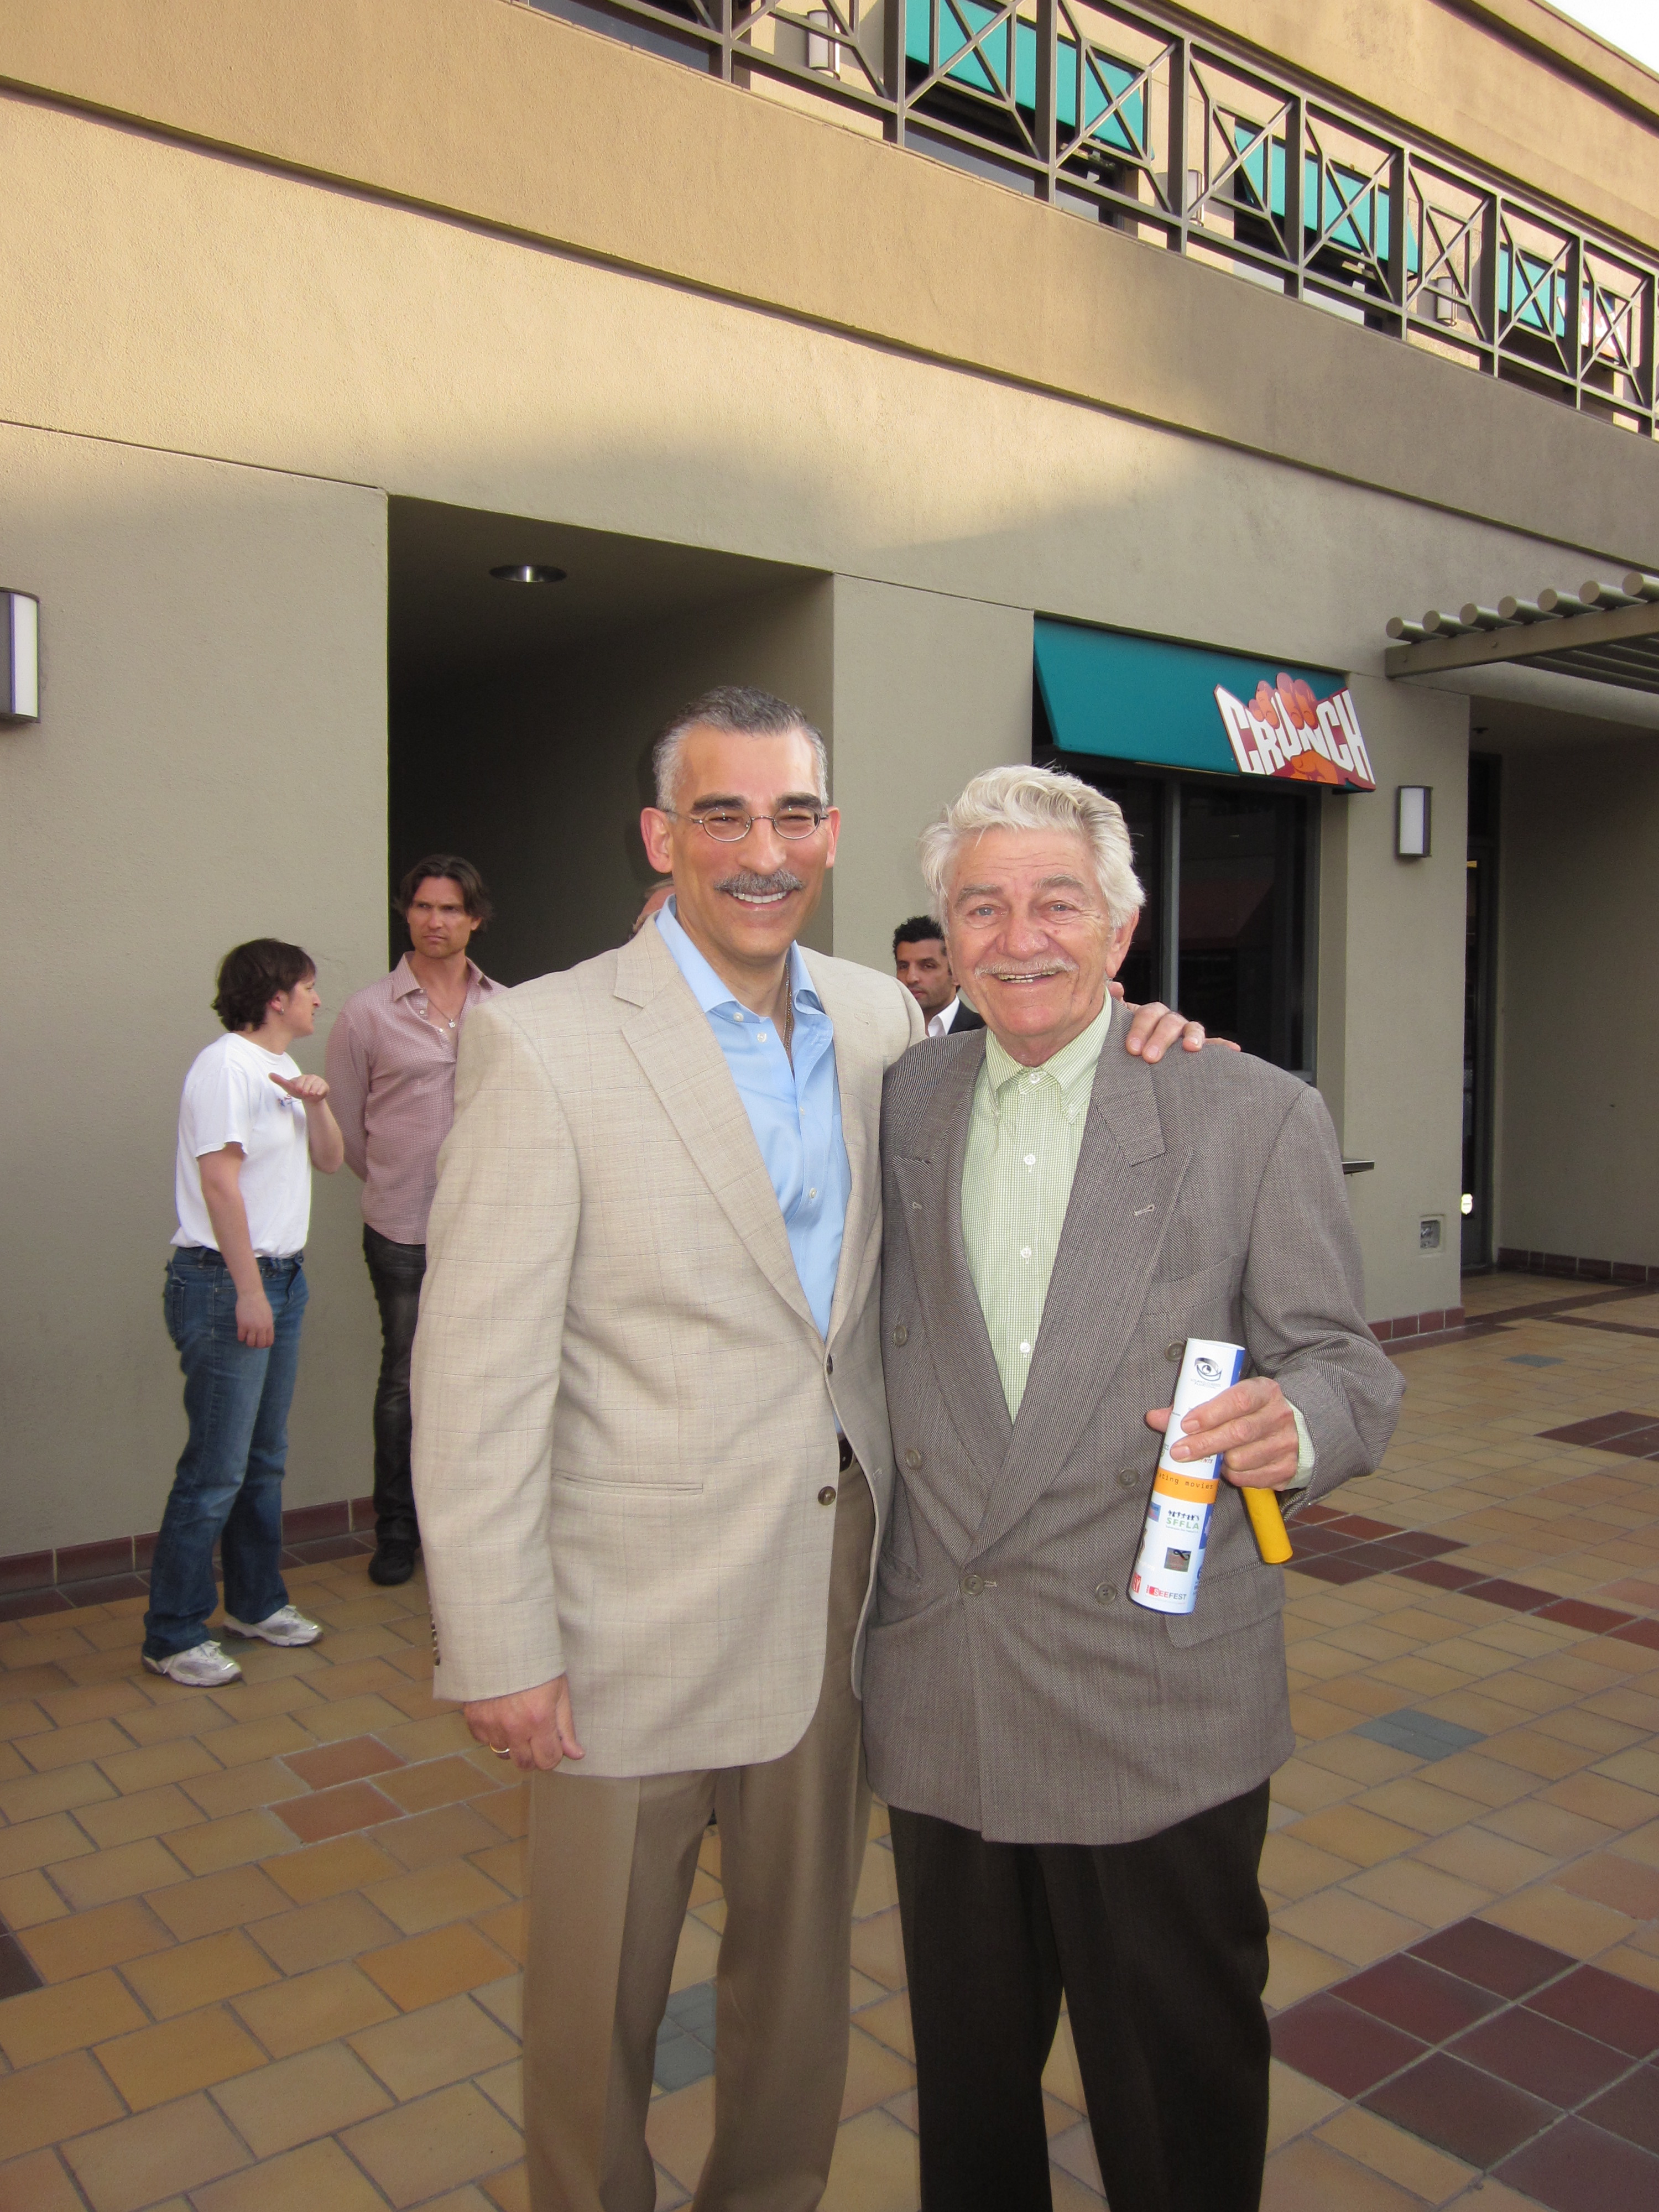 Paul and Seymour Cassel at the